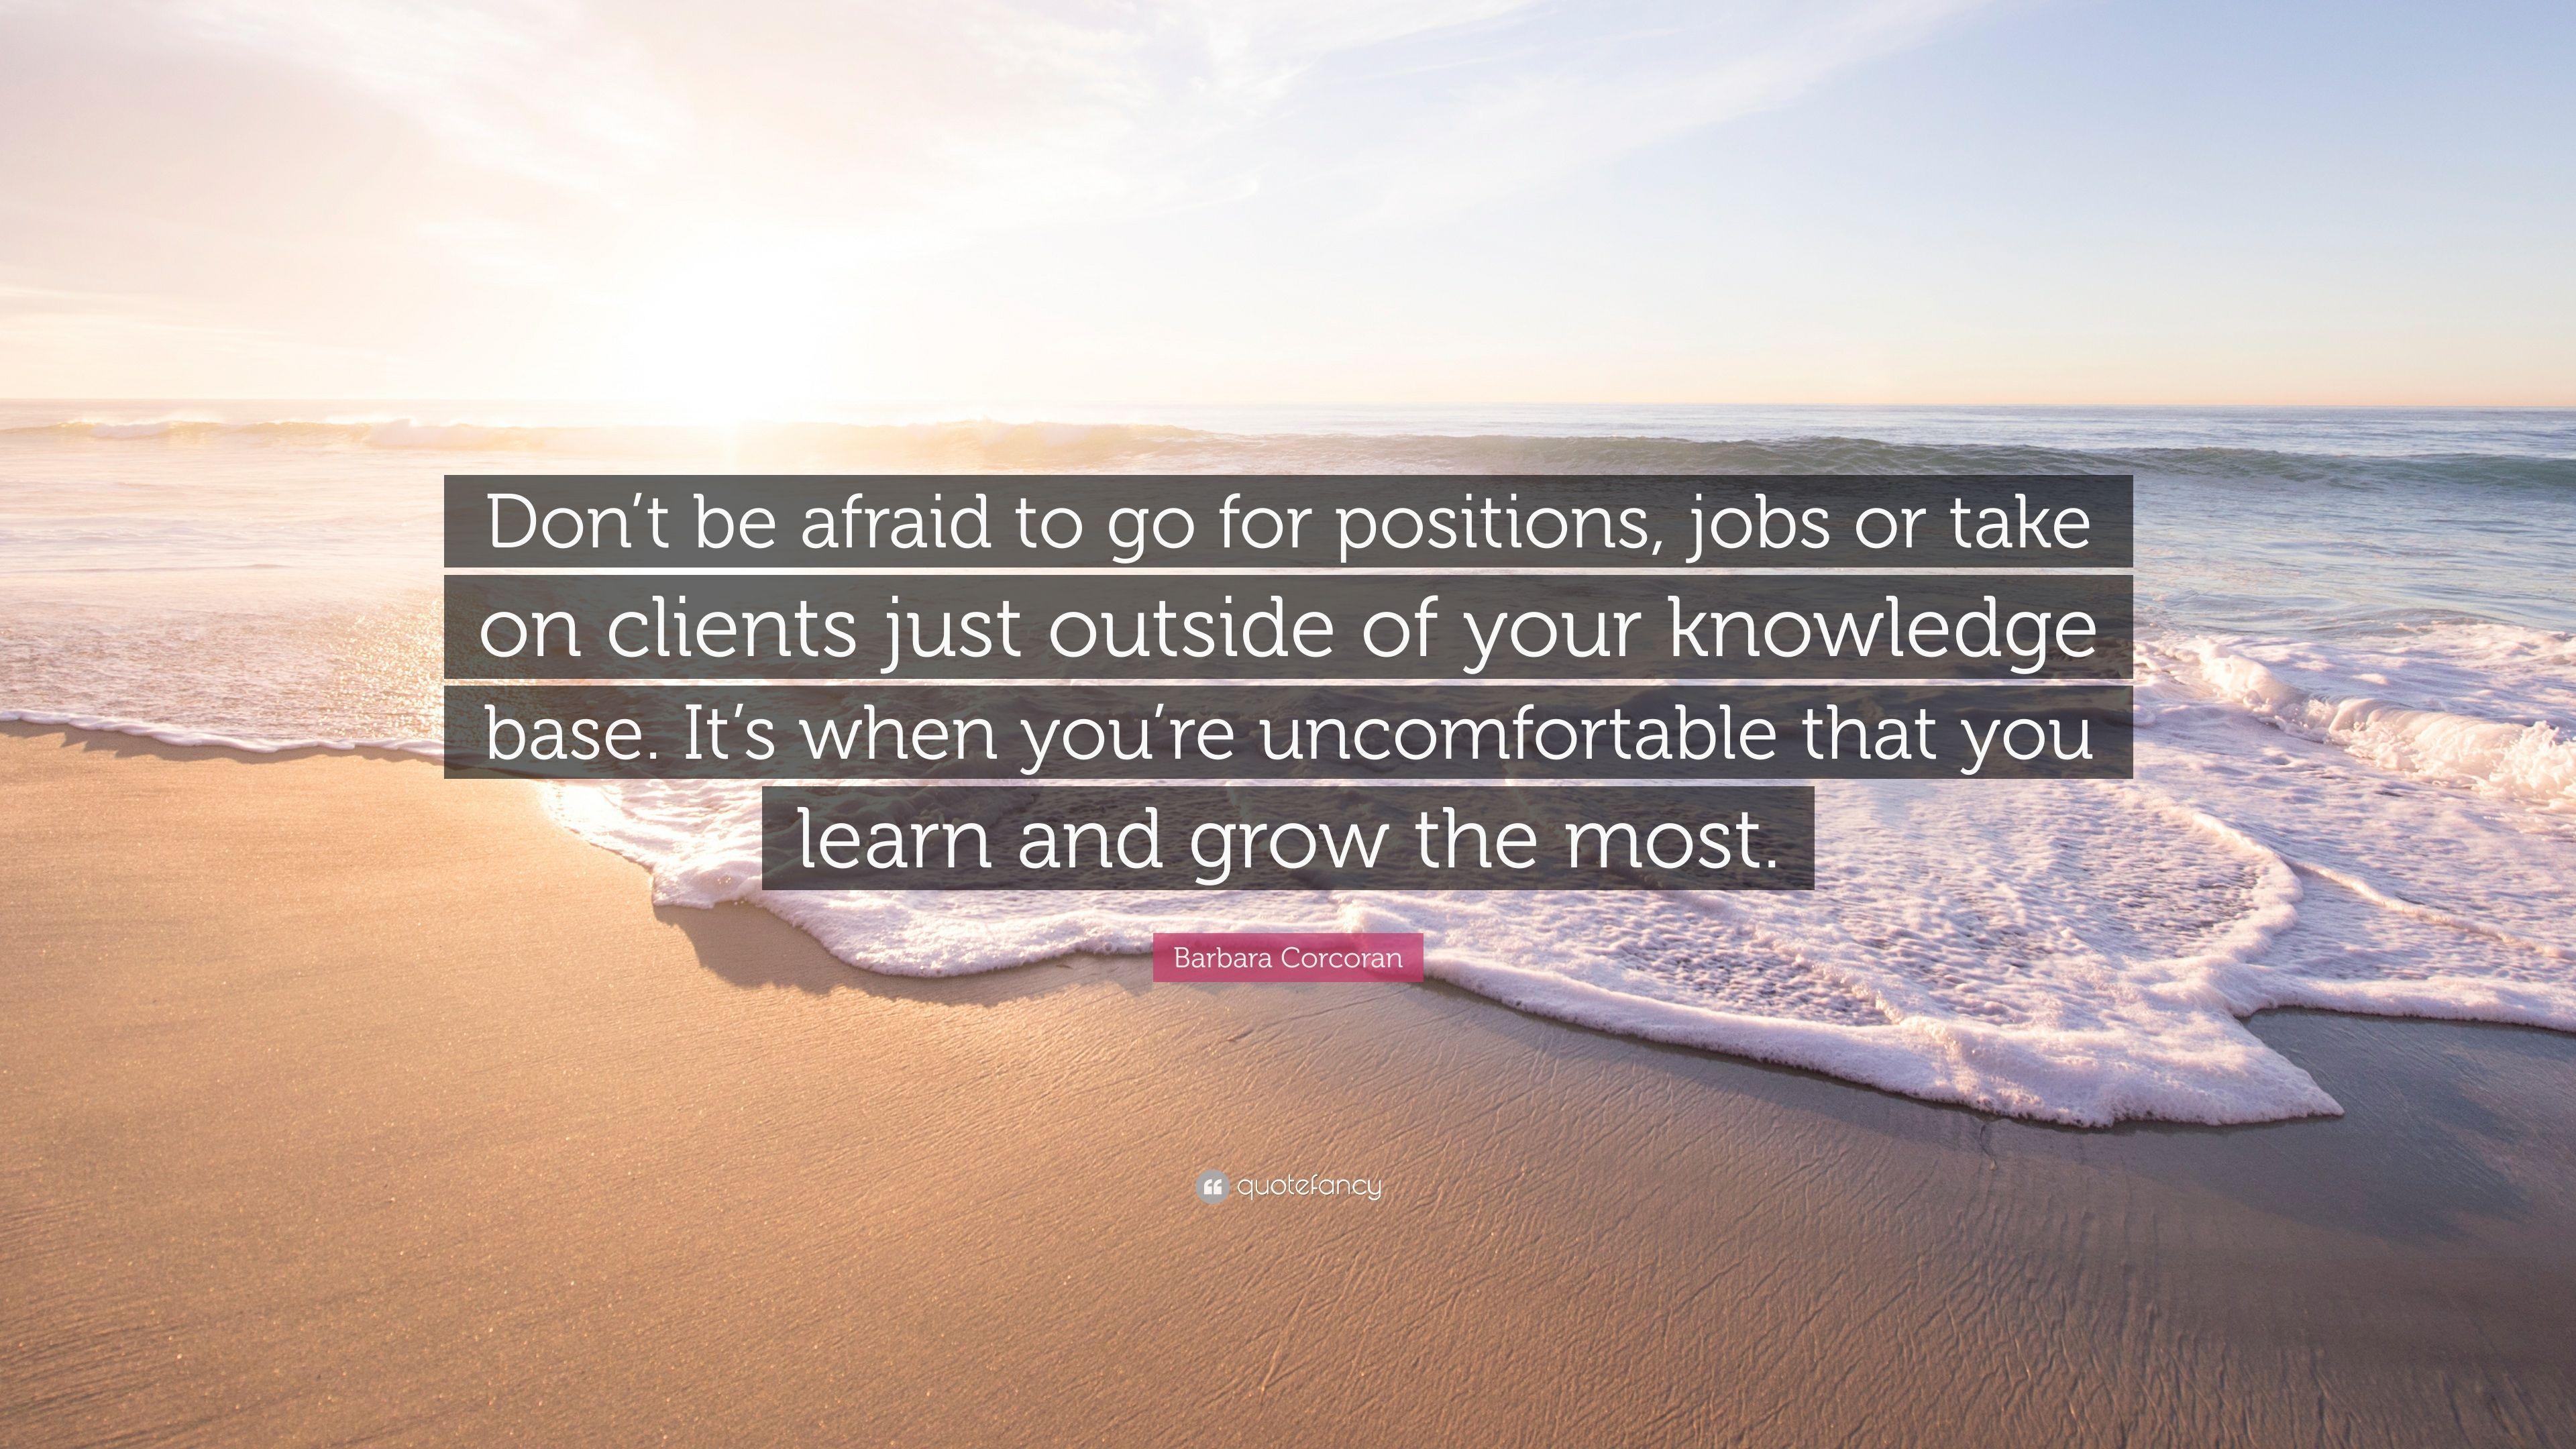 Barbara Corcoran Quote: "Don't be afraid to go for positions, job...